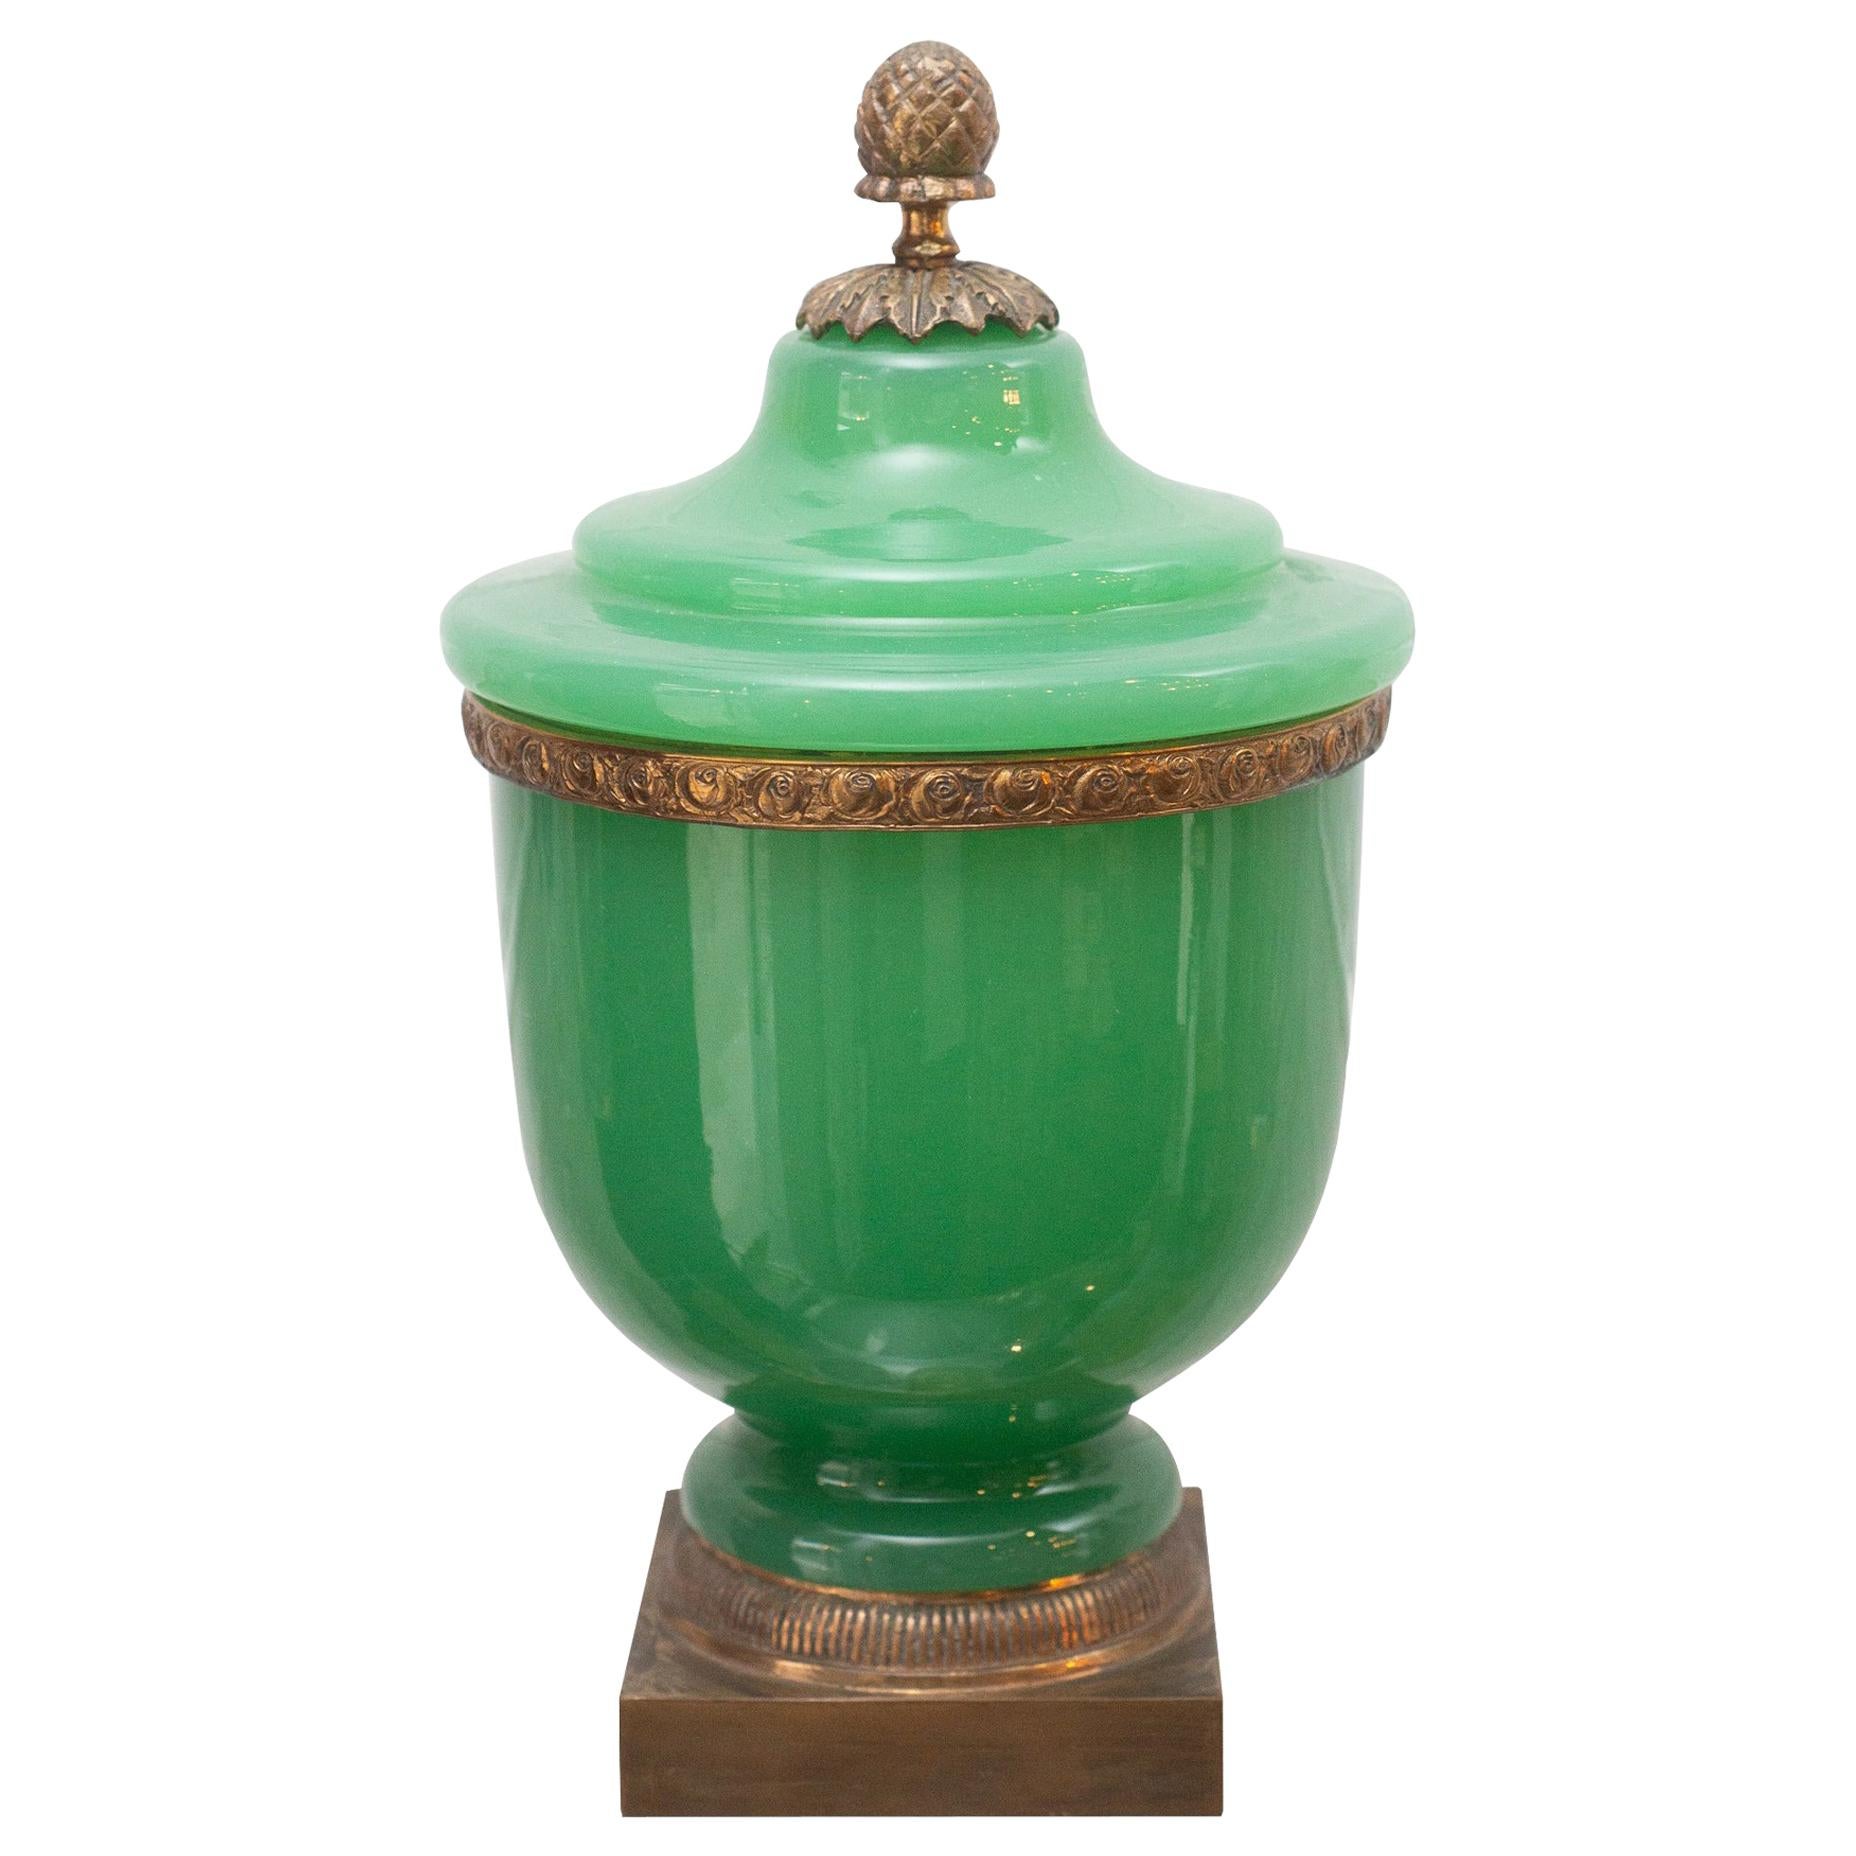 Antique Green Opaline Large Covered Jar with Acorn Finial